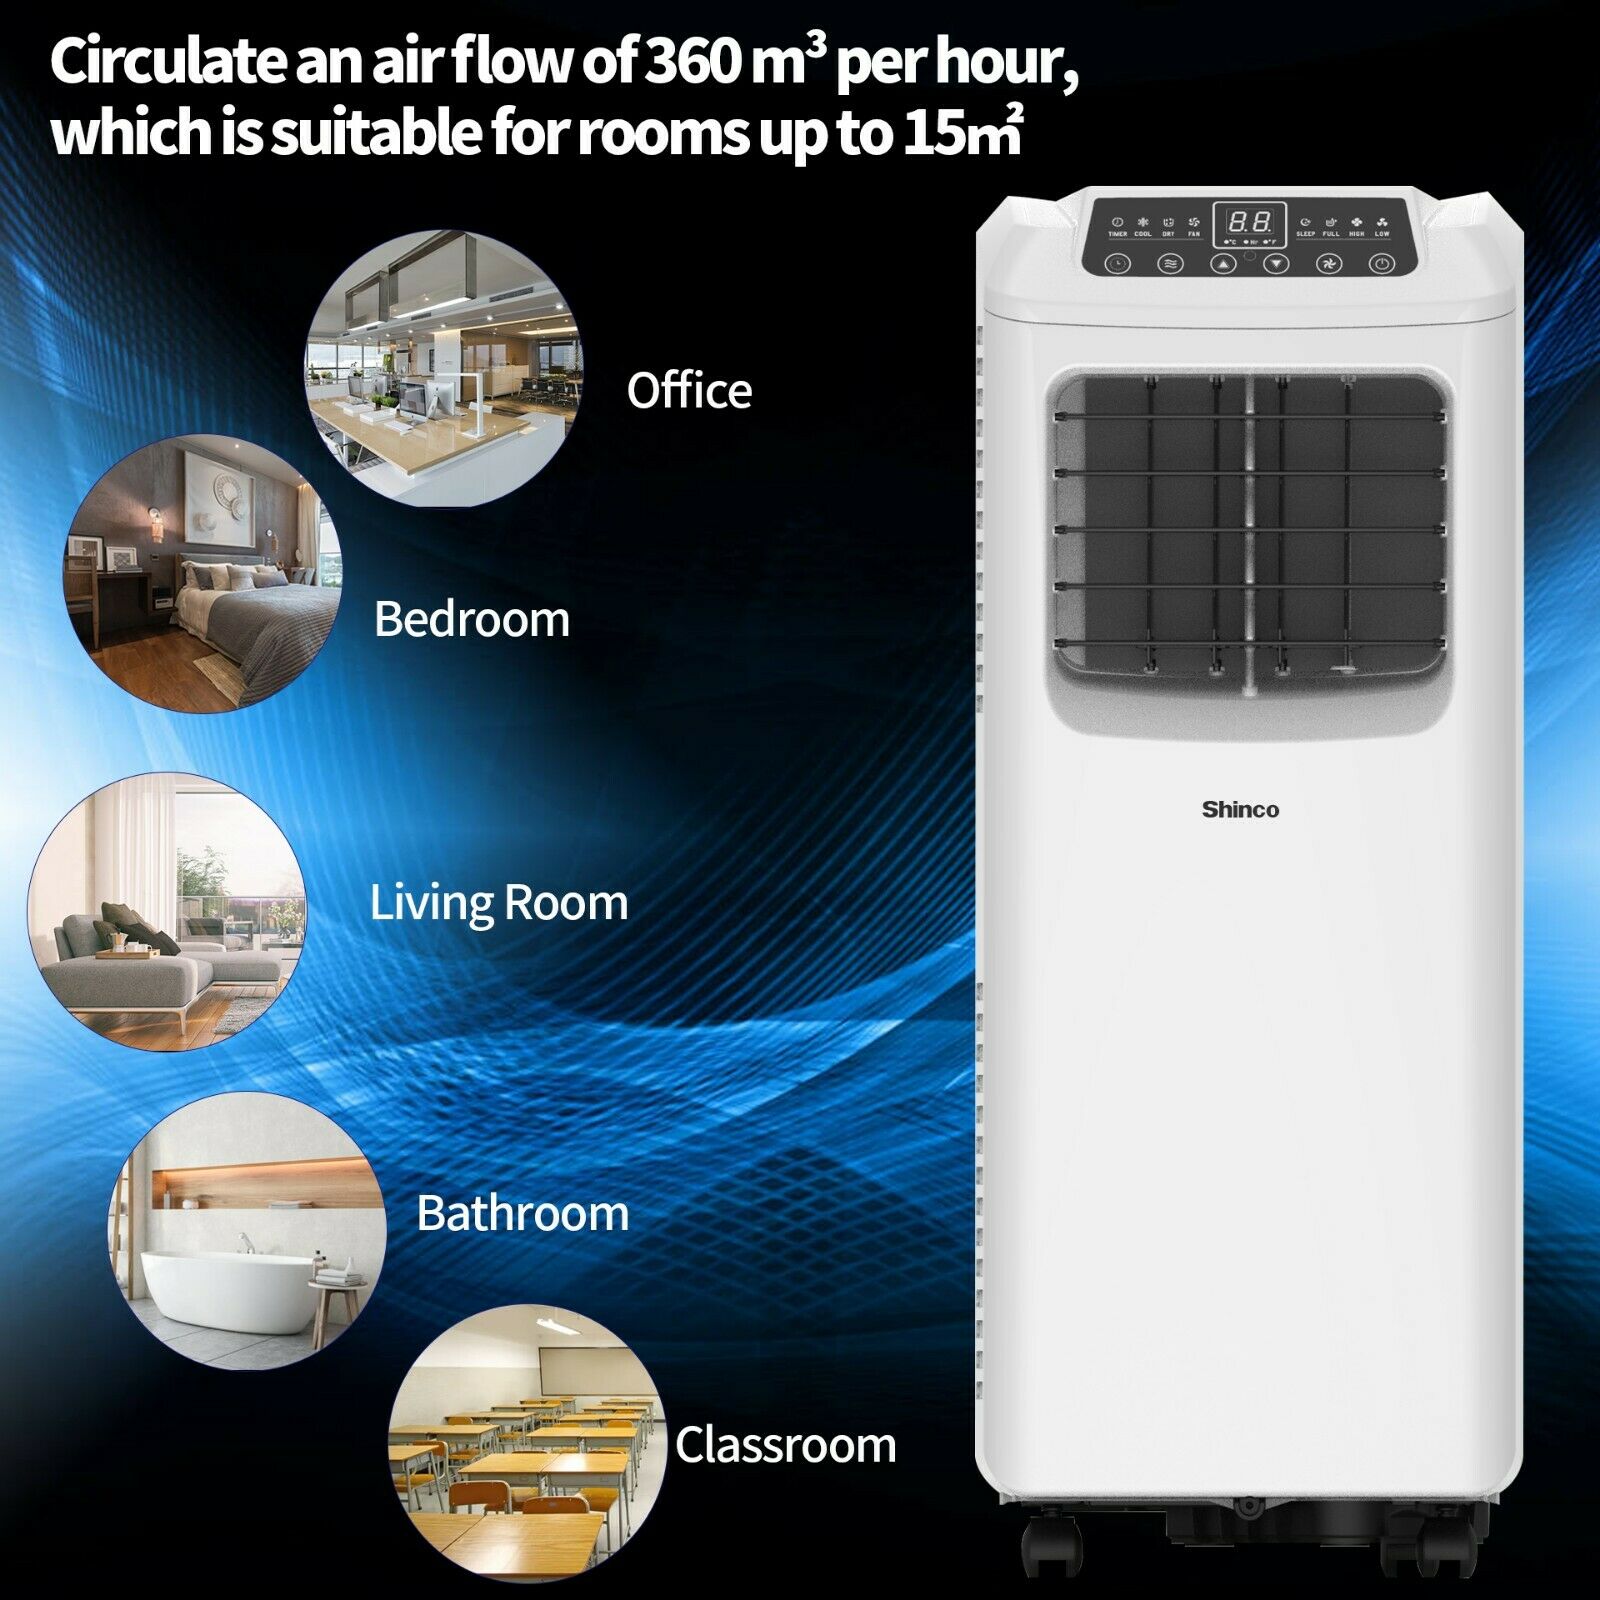 Portable Air conditioner air-conditioning use options test and small picture Office bedroom living room bathroom,classroom workshop 